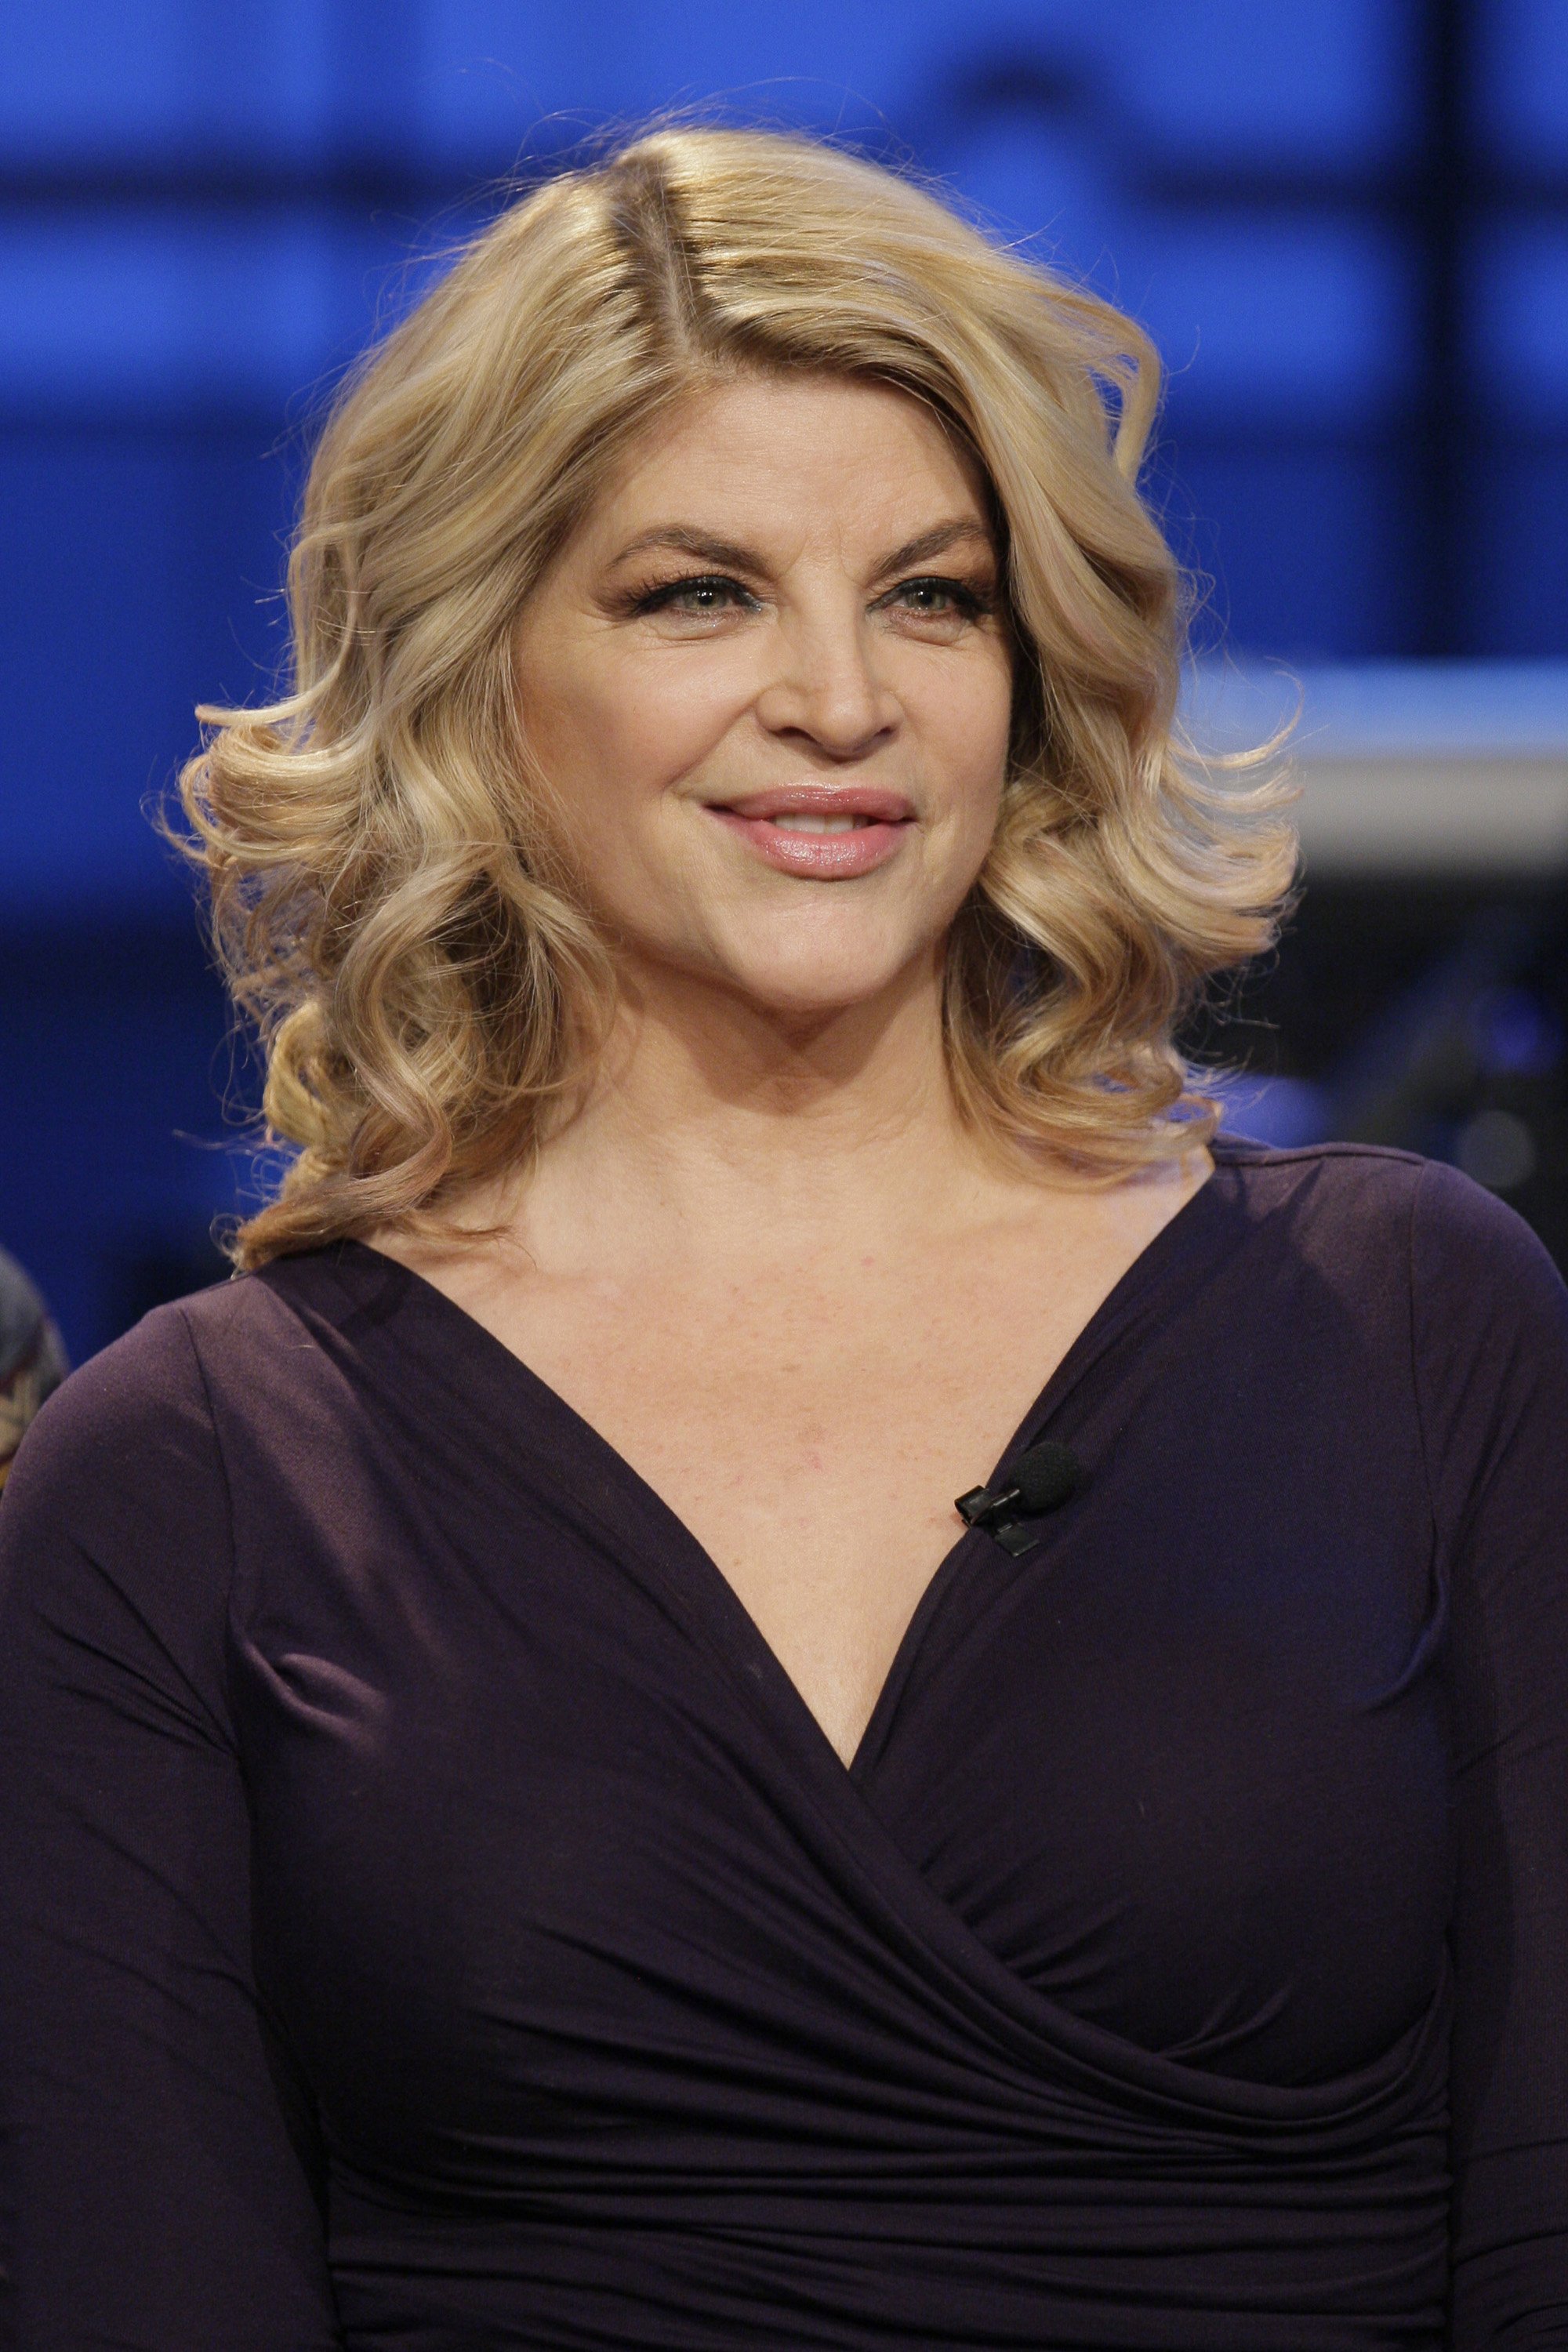 Actress Kirstie Alley on "The Tonight Show with Jay Leno" on December 10, 2013 | Source: Getty Images